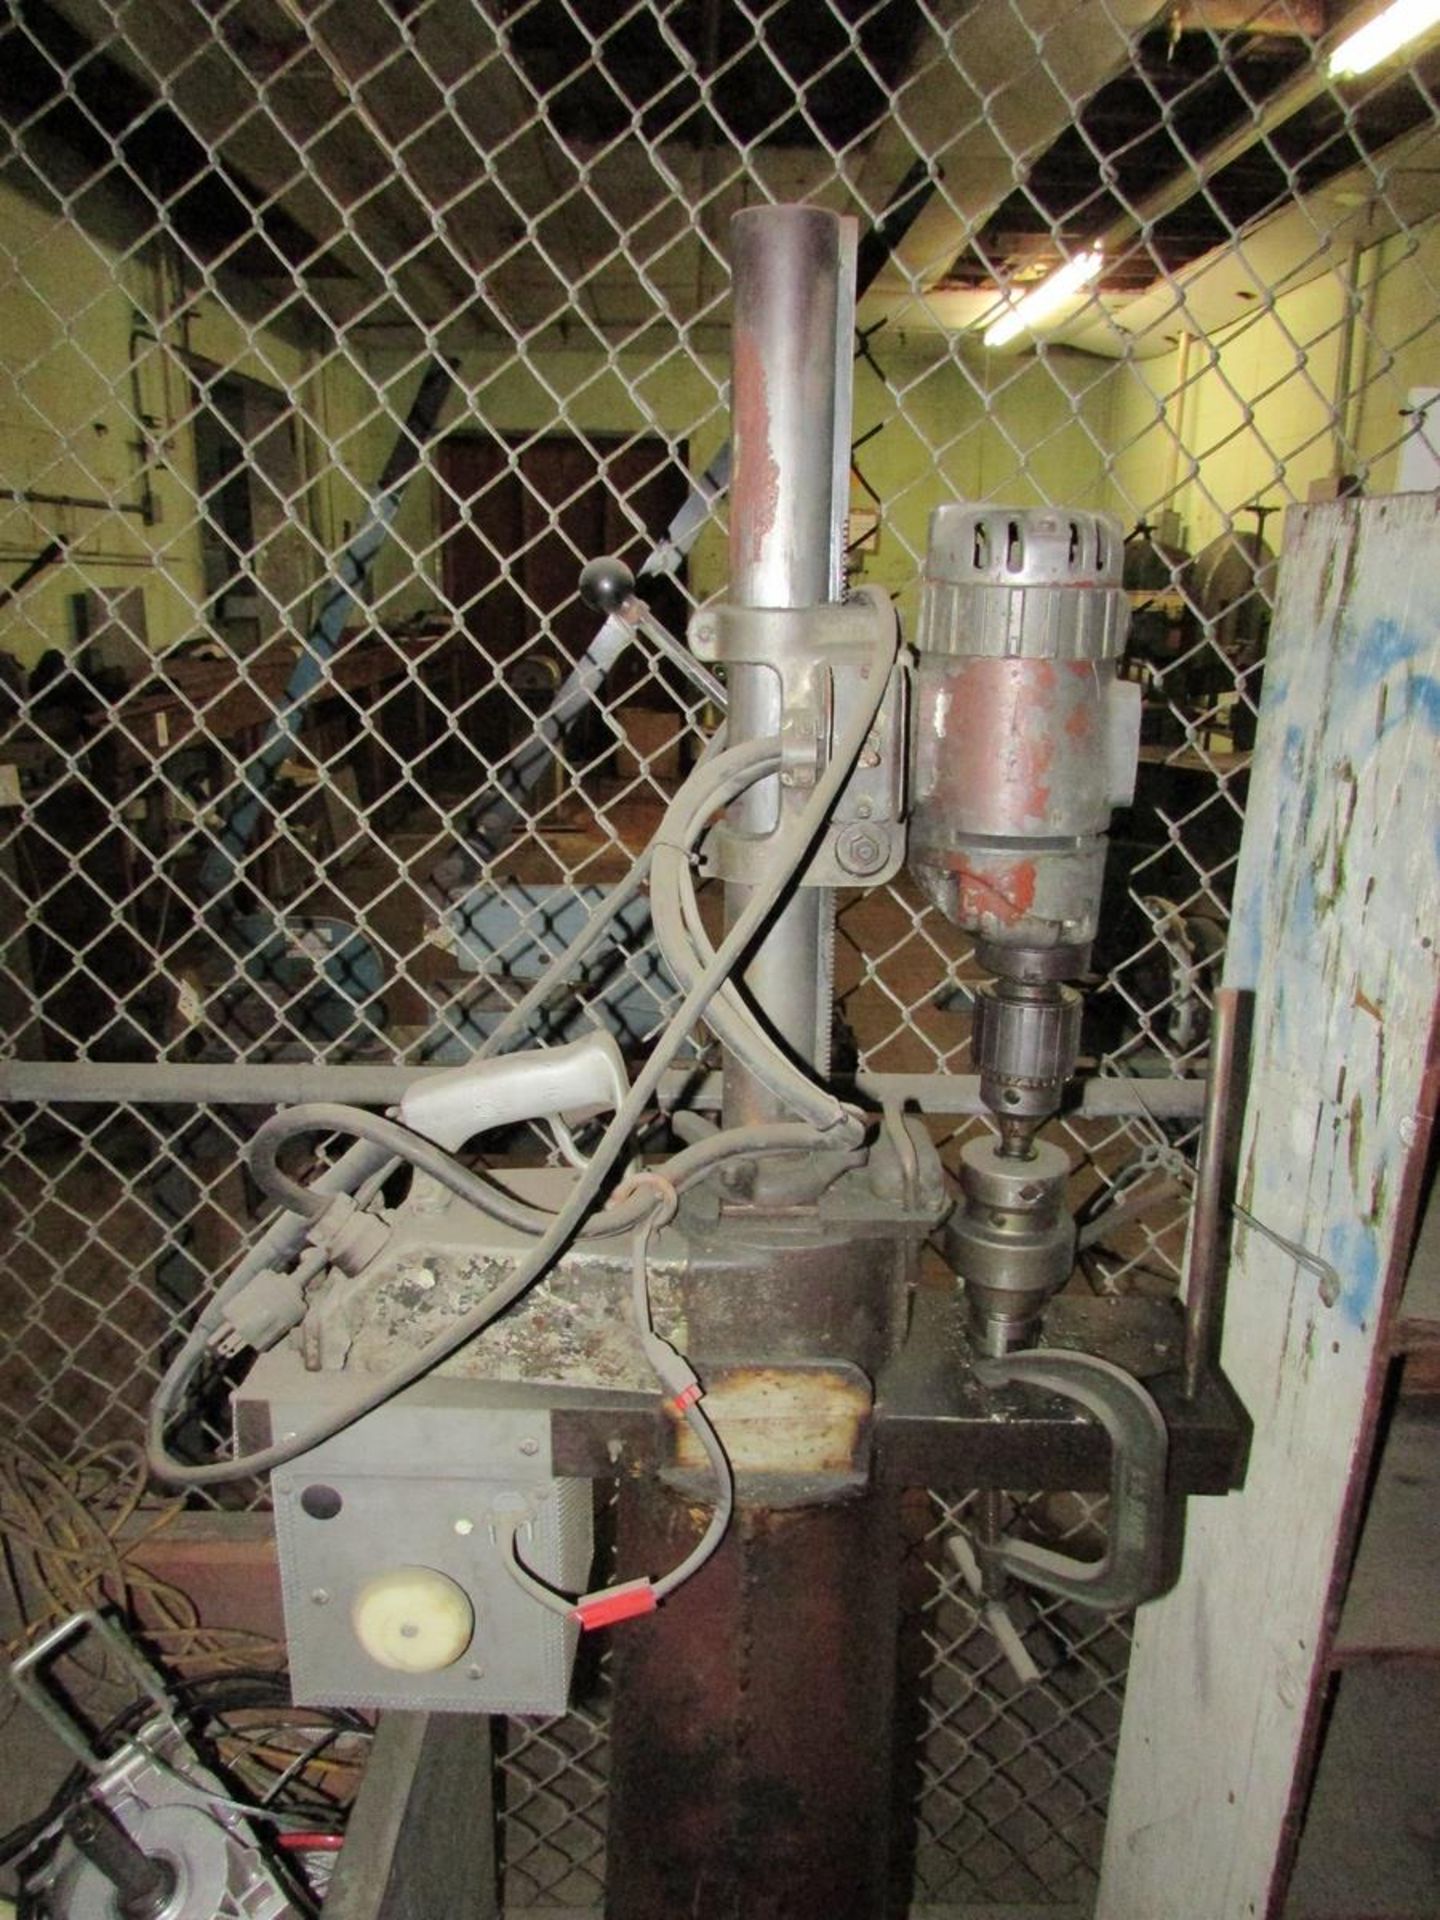 Remaining Contents of Return Cage and Prep Room, To Include Assorted Copper Pipe, PVC Pipe, Lockers, - Image 11 of 15